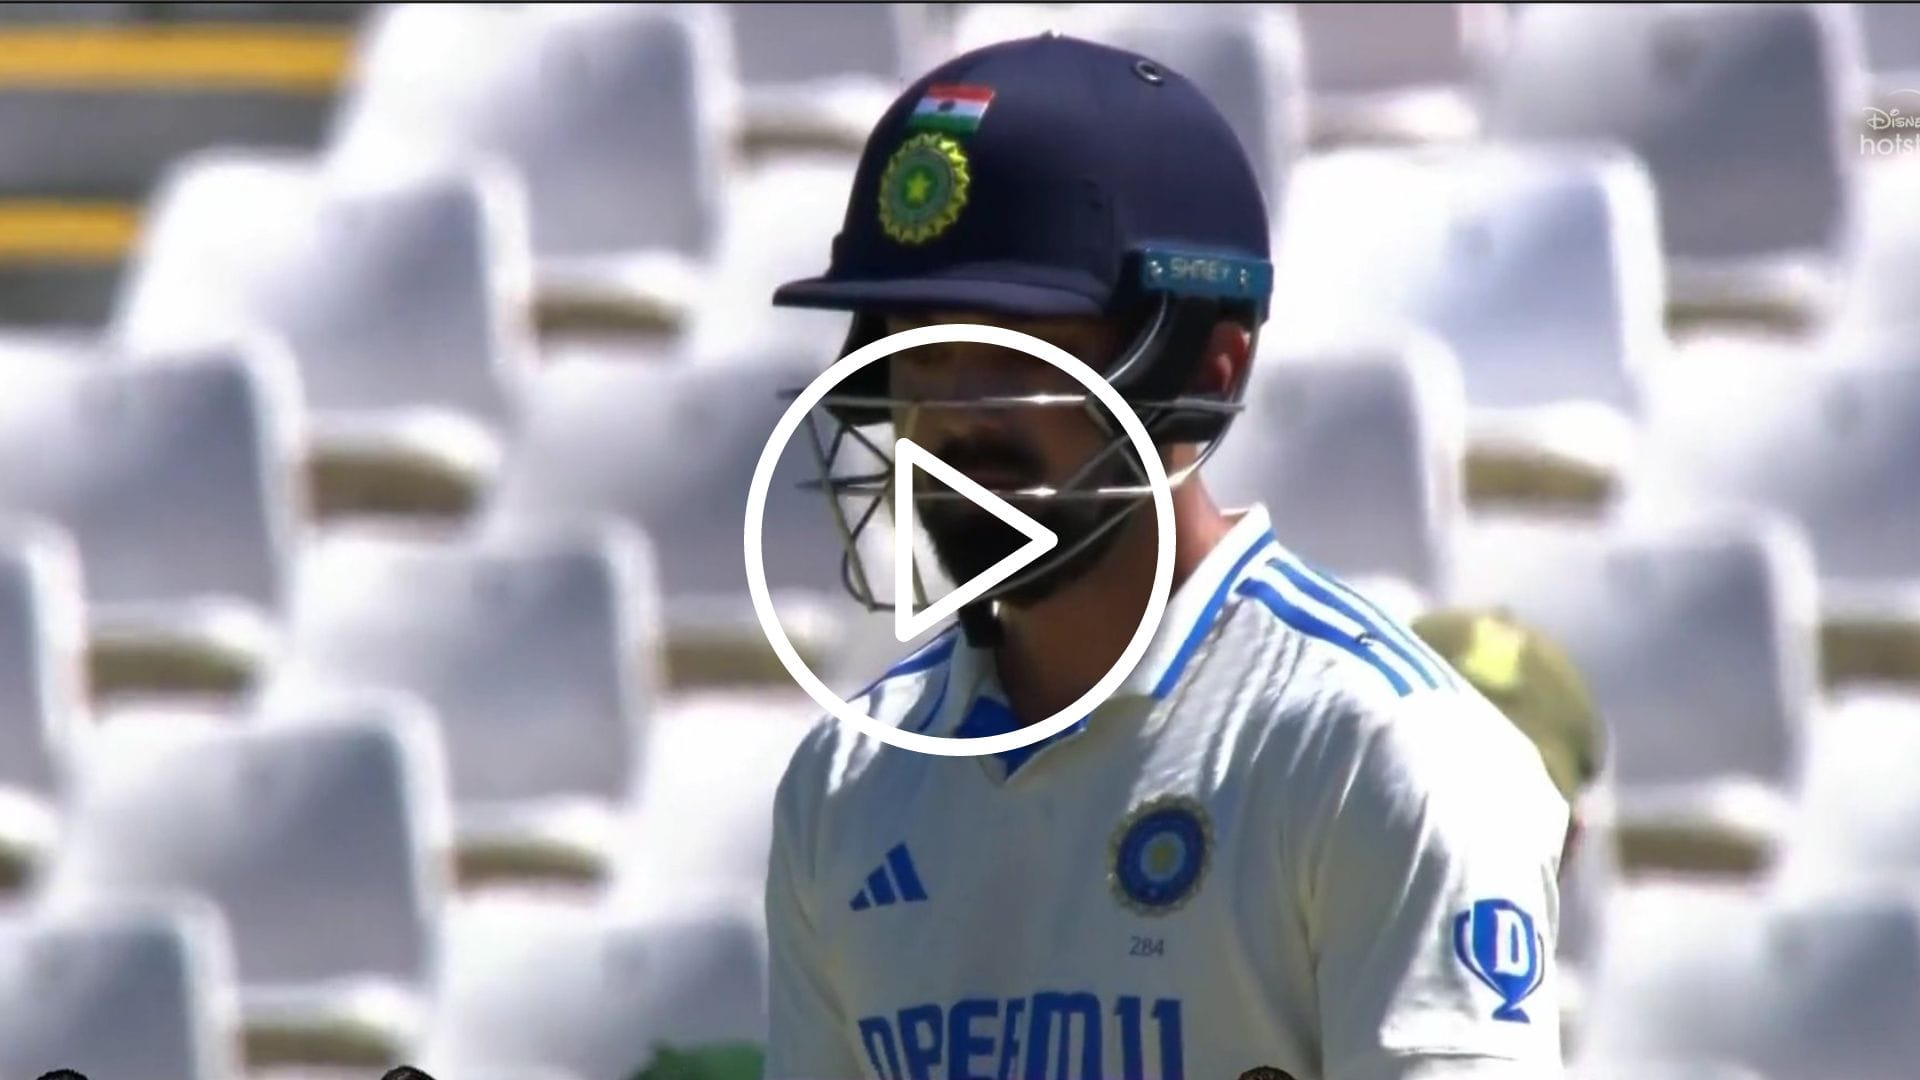 [Watch] KL Rahul 'Heartbroken' As Lungi Ngidi Gets Him With A Vicious Bumper